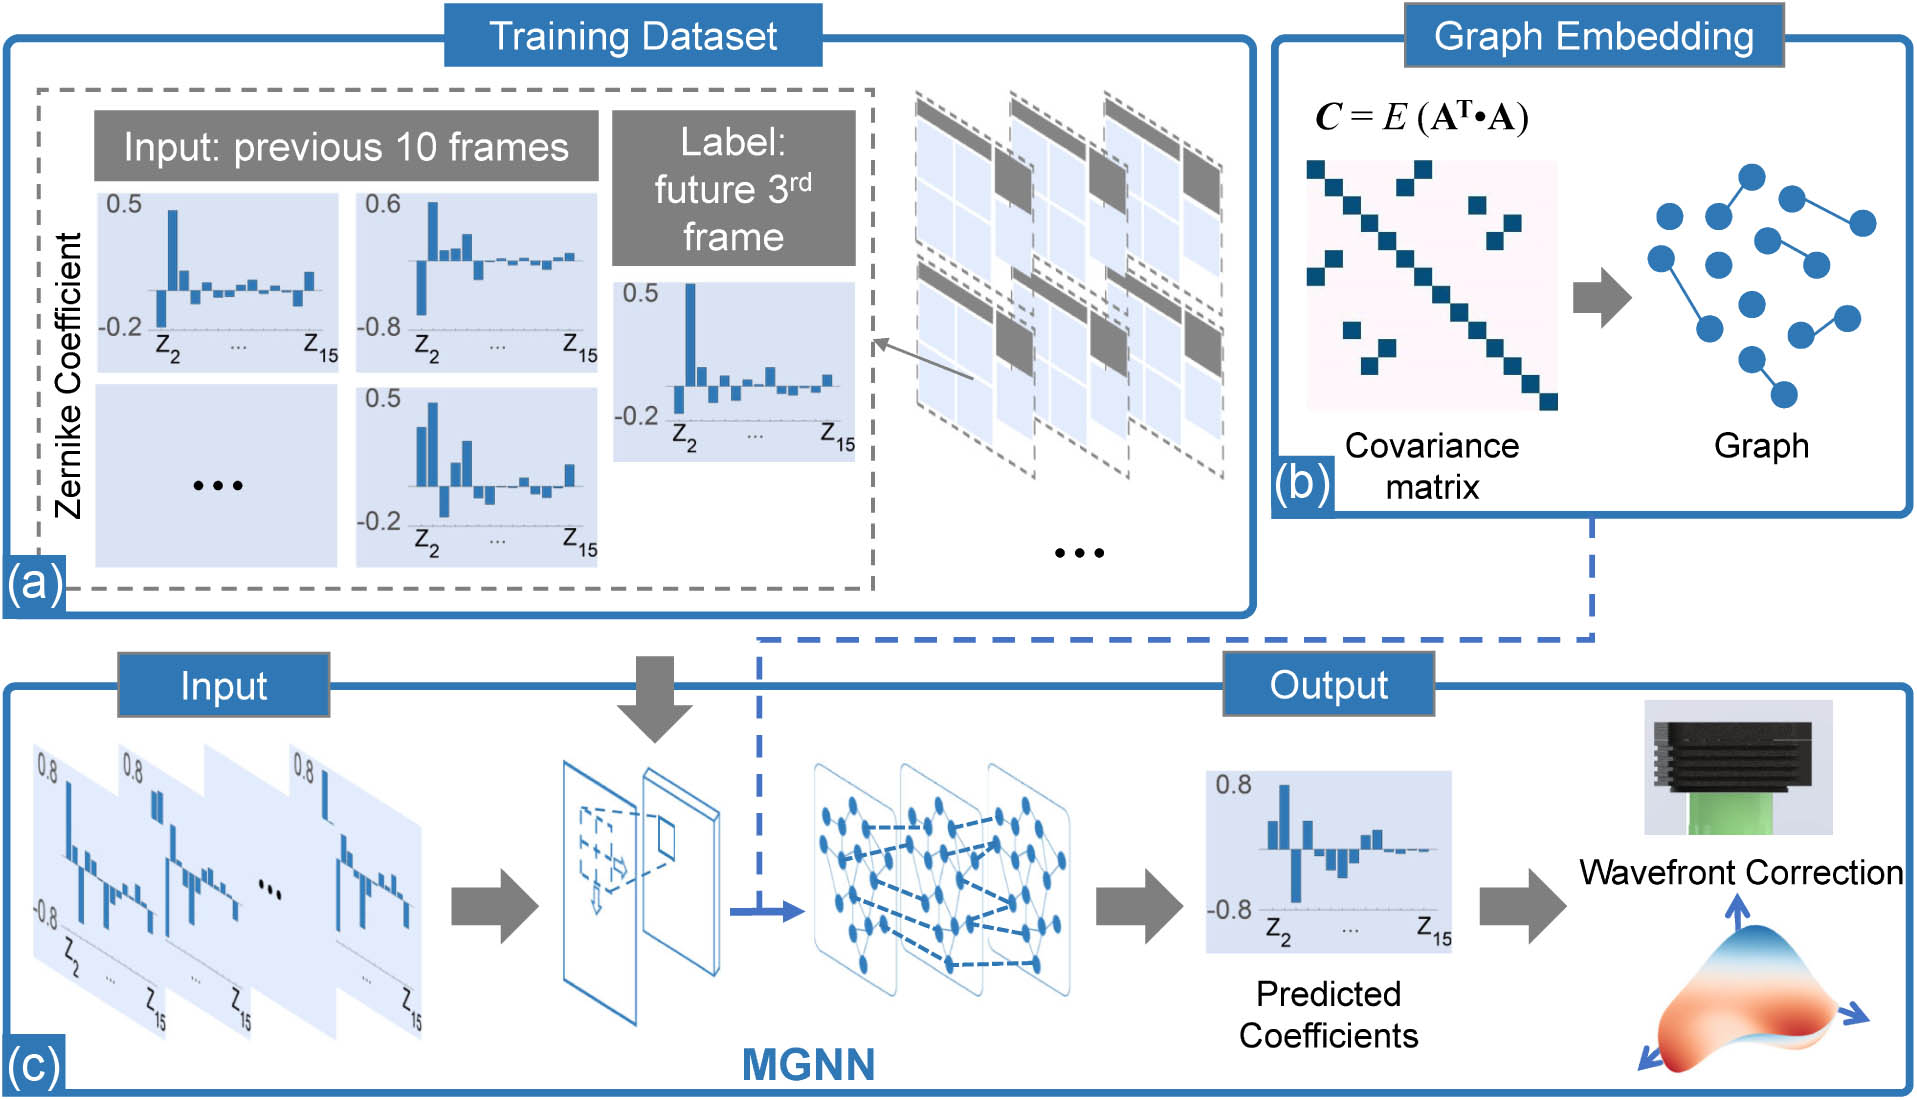 Flowchart of spatiotemporal wavefront prediction. (a) Training dataset configuration. (b) Graph embedding from the covariance matrix of coefficients. (c) In the testing process, Zernike coefficients of previous 10 frames are inputs, and the predicted coefficients are obtained by the trained MGNN.